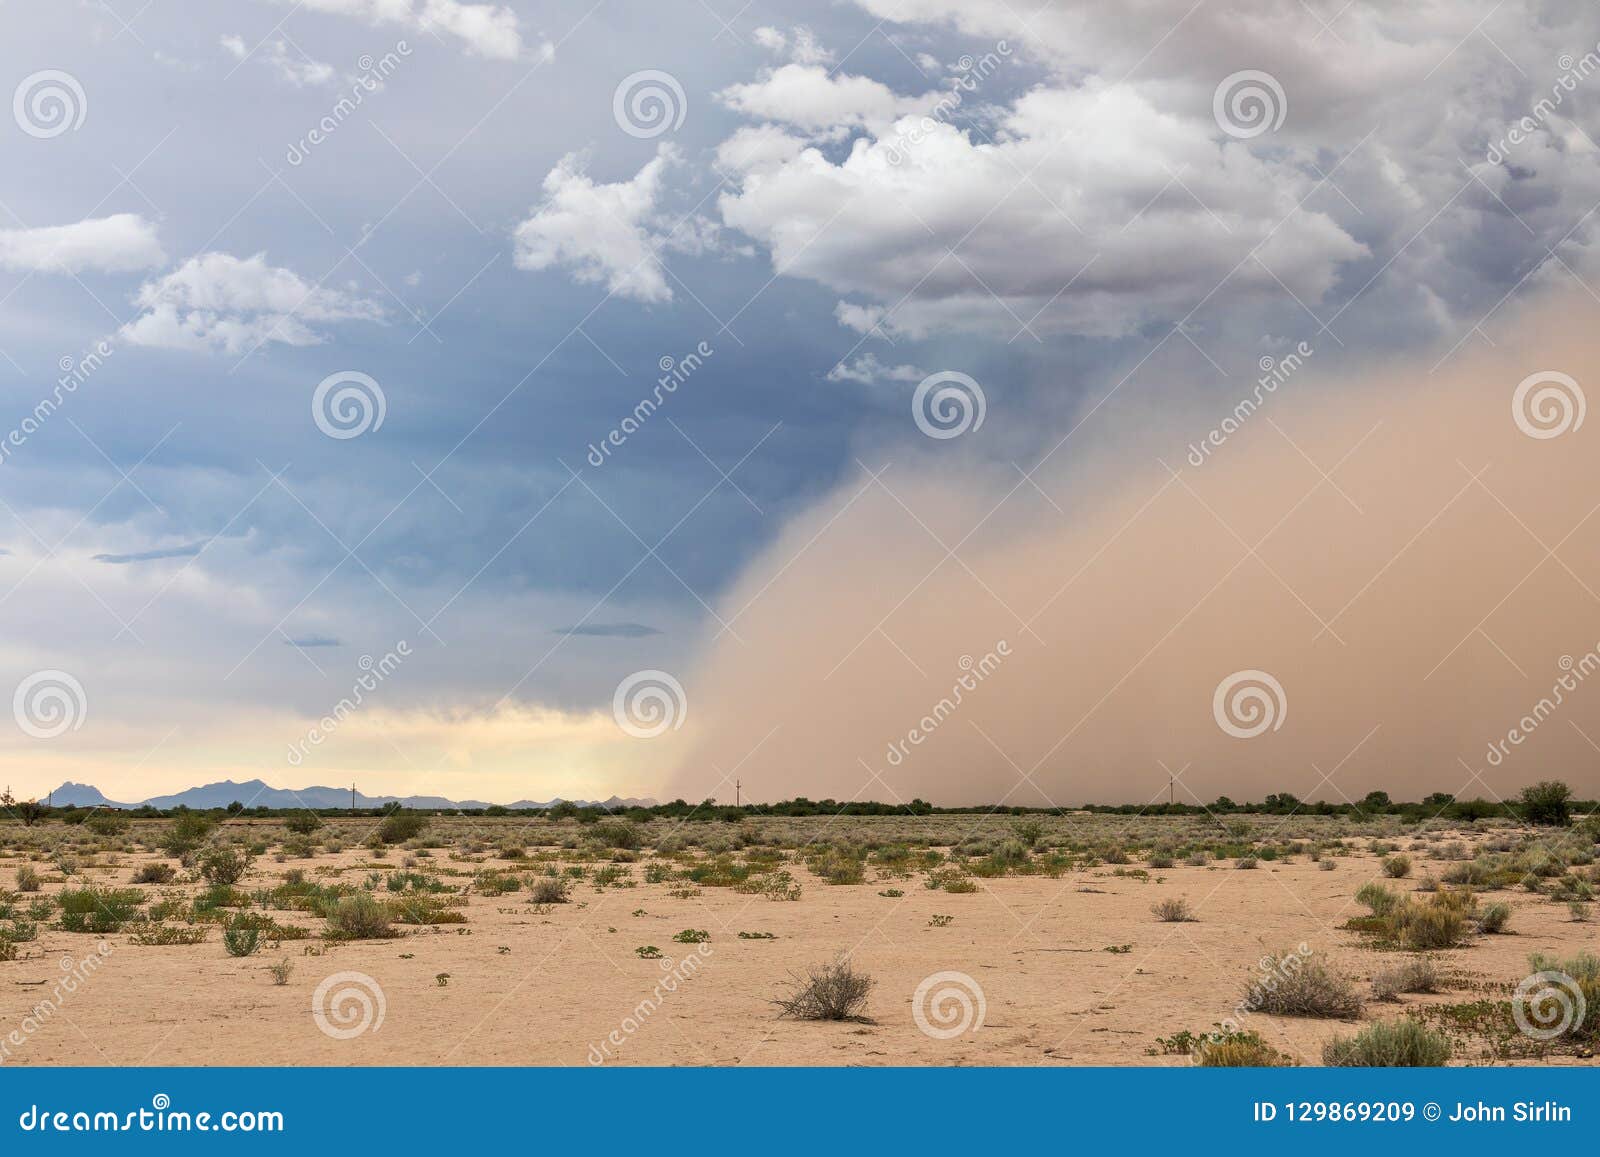 1 729 Desert Dust Storm Photos Free Royalty Free Stock Photos From Dreamstime